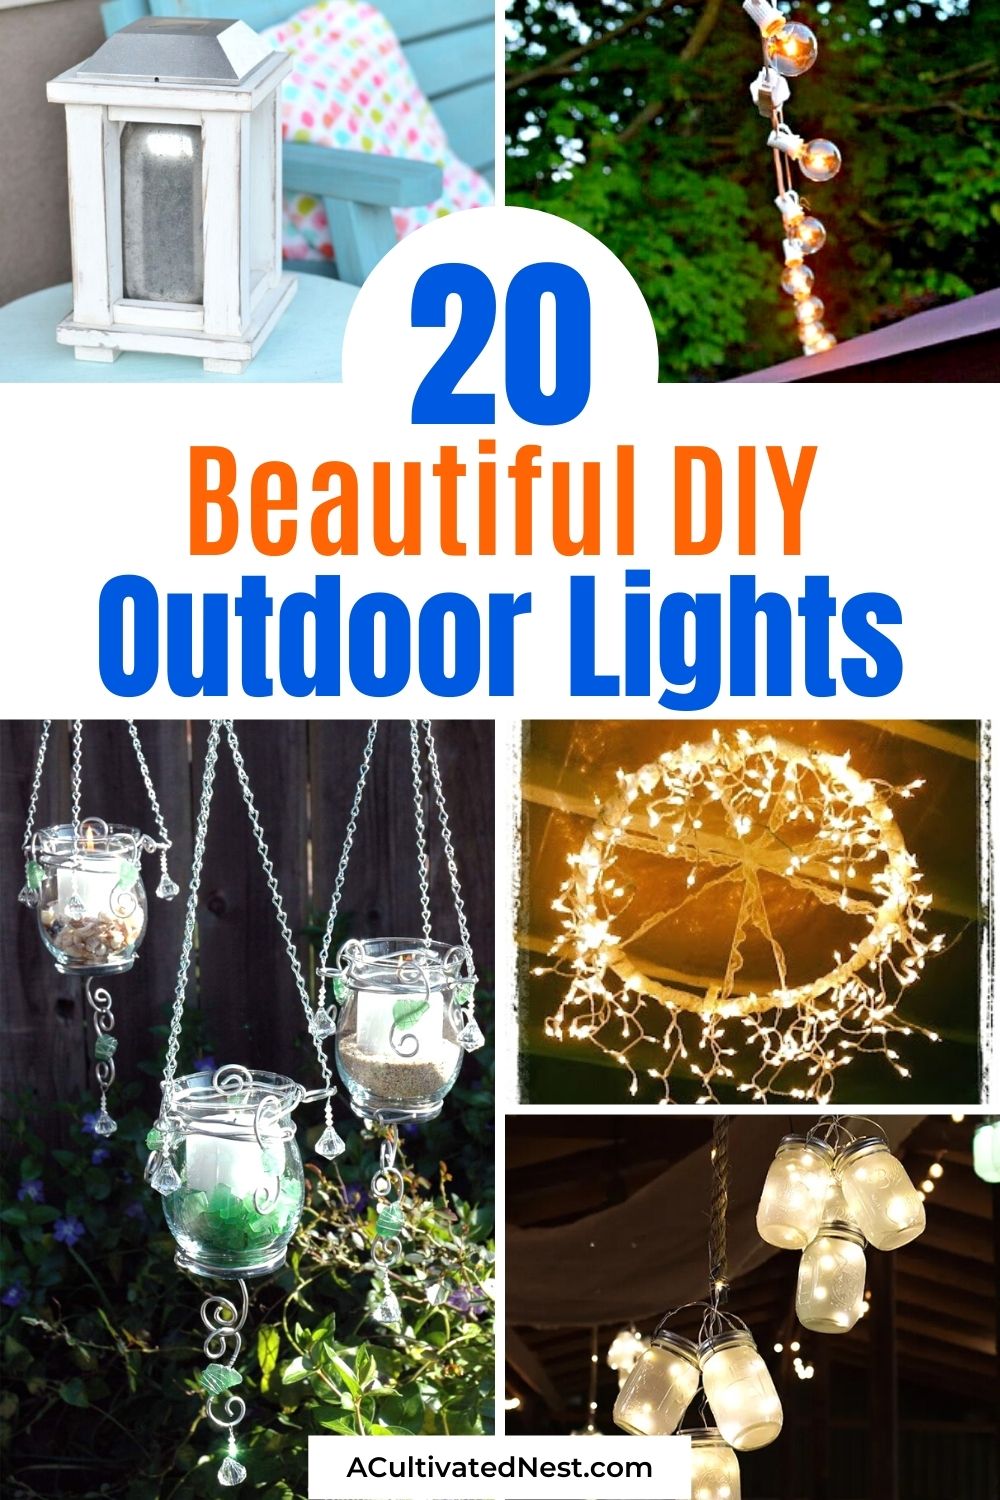 20 Beautiful DIY Outdoor Lights- Get your garden or backyard ready for warmer weather with these 20 beautiful DIY outdoor lights projects! These simple projects make a big statement! | #diyProjects #DIY #dgardenLighting #outdoorLights #ACultivatedNest